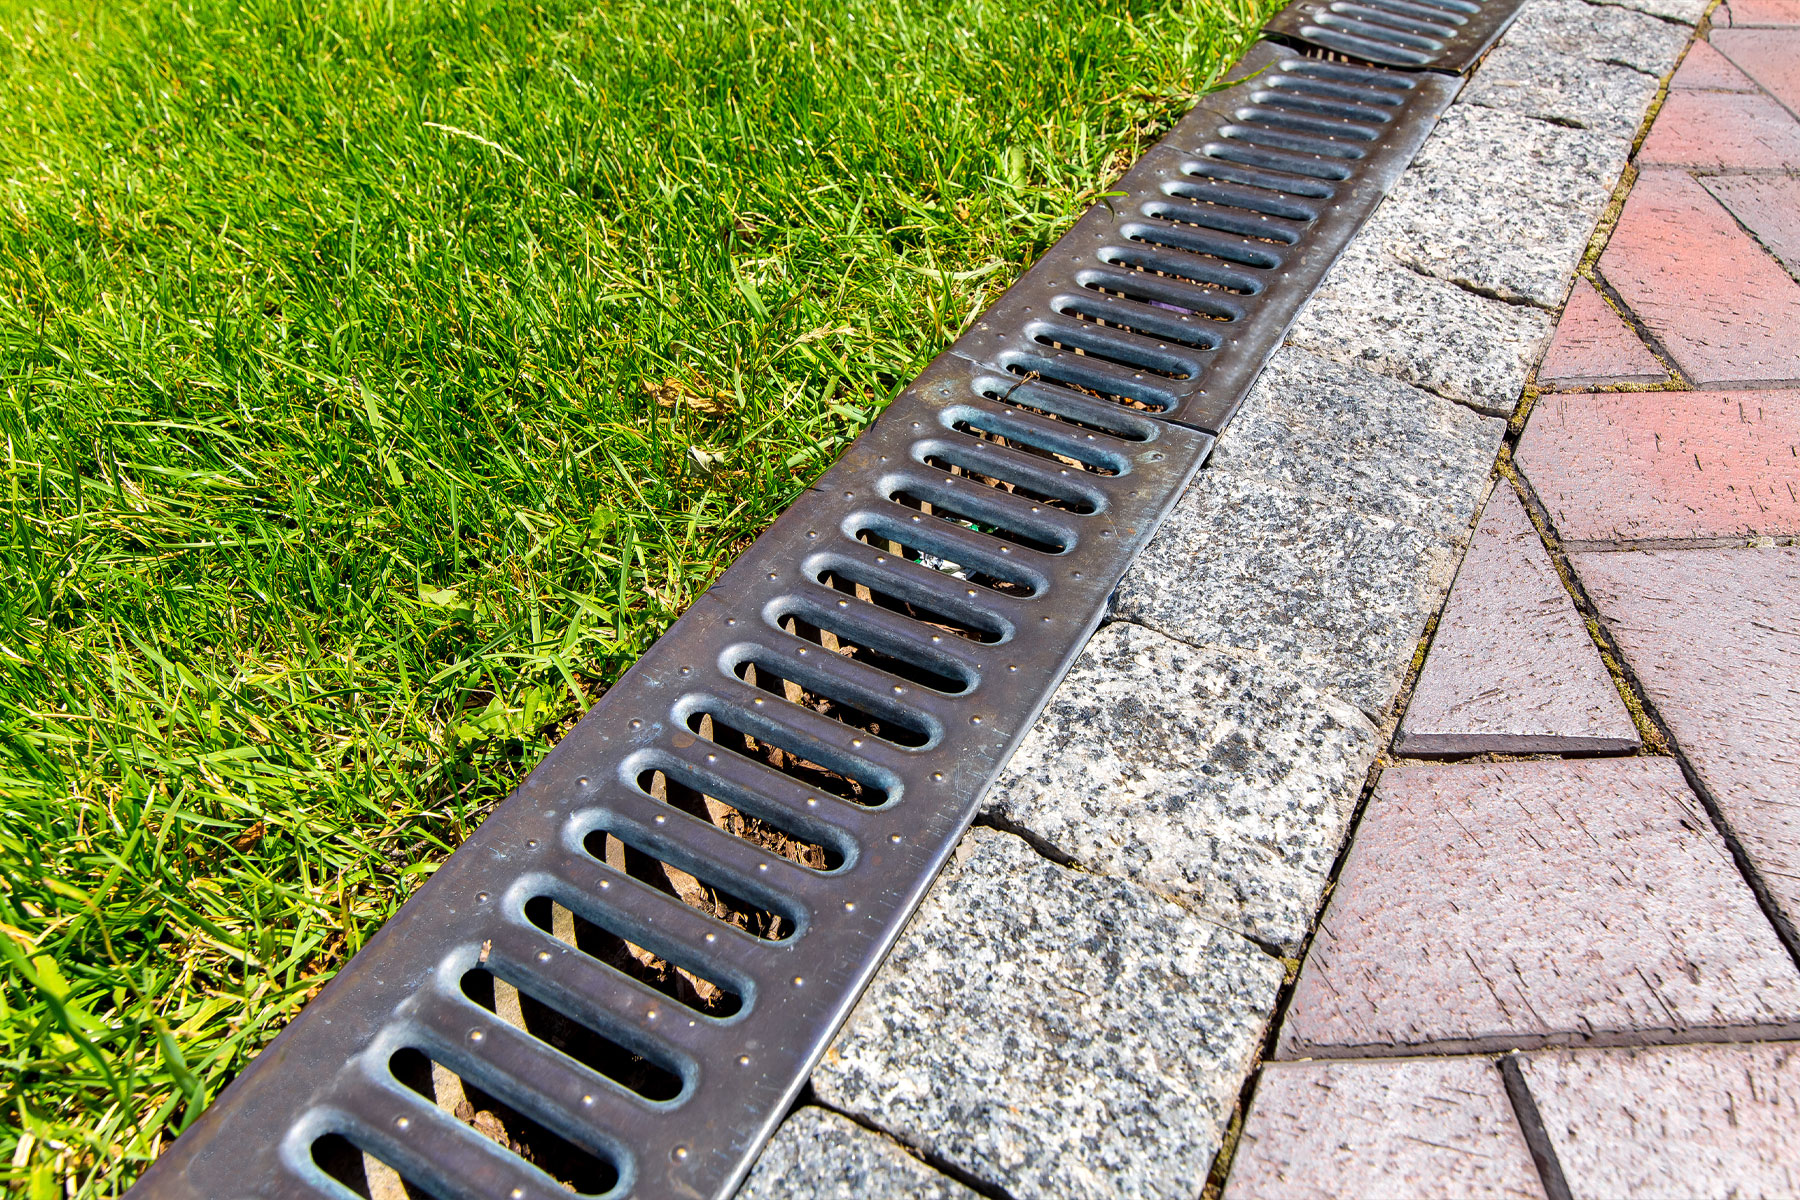 Example of a drainage system along the interlock and grass